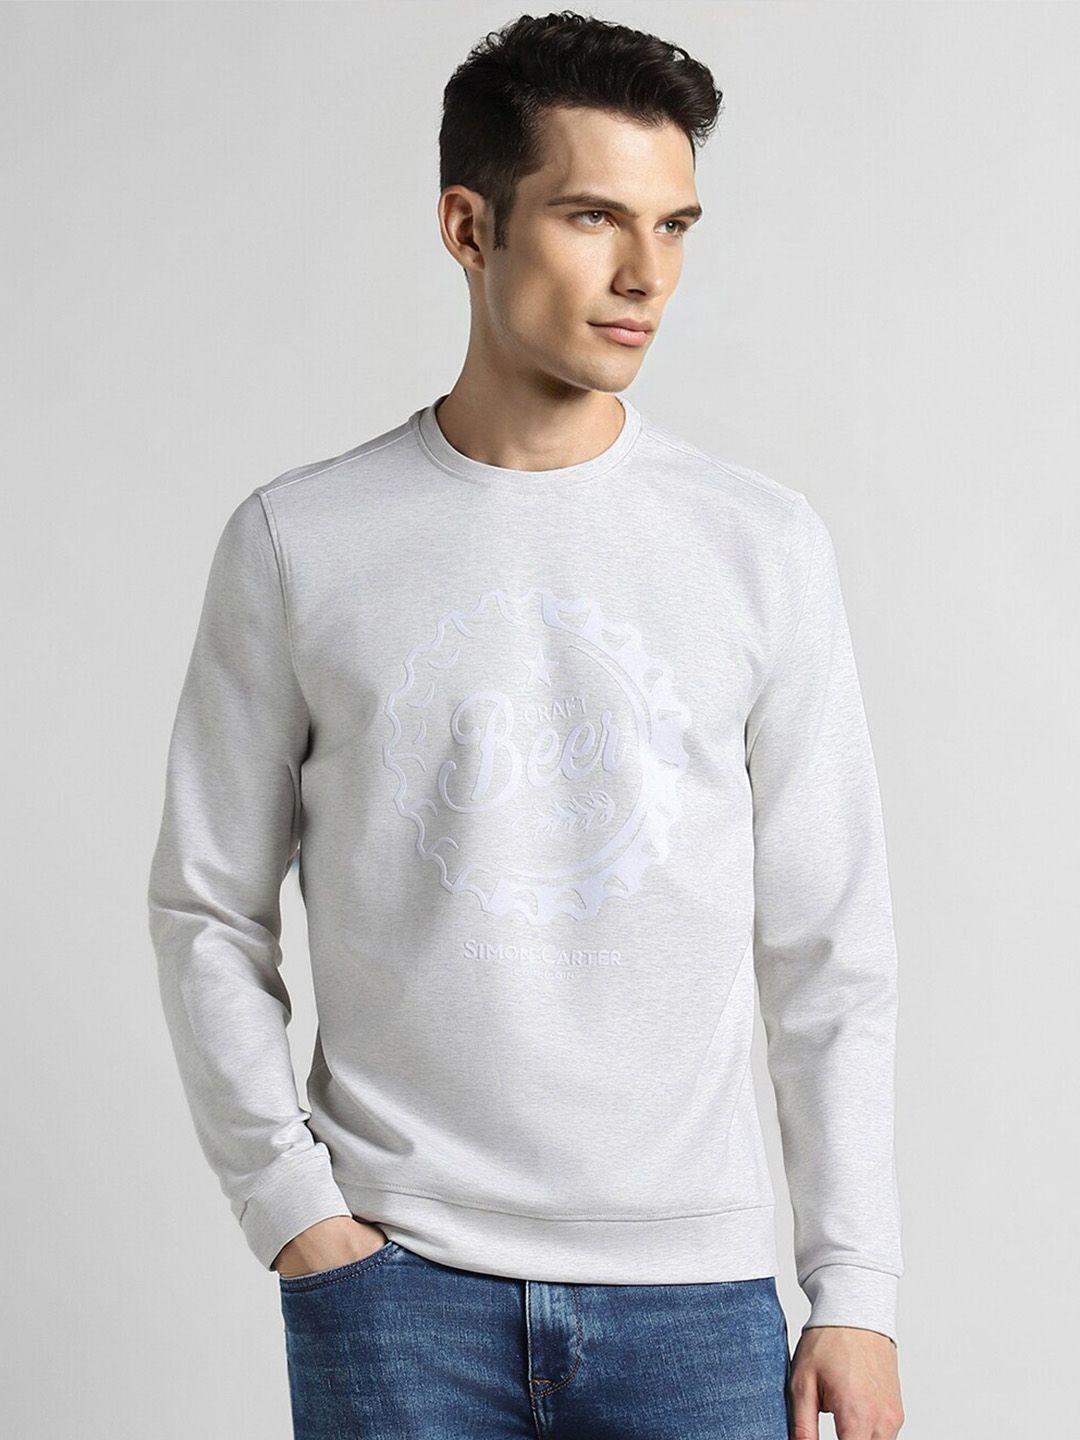 simon carter london typography printed pullover